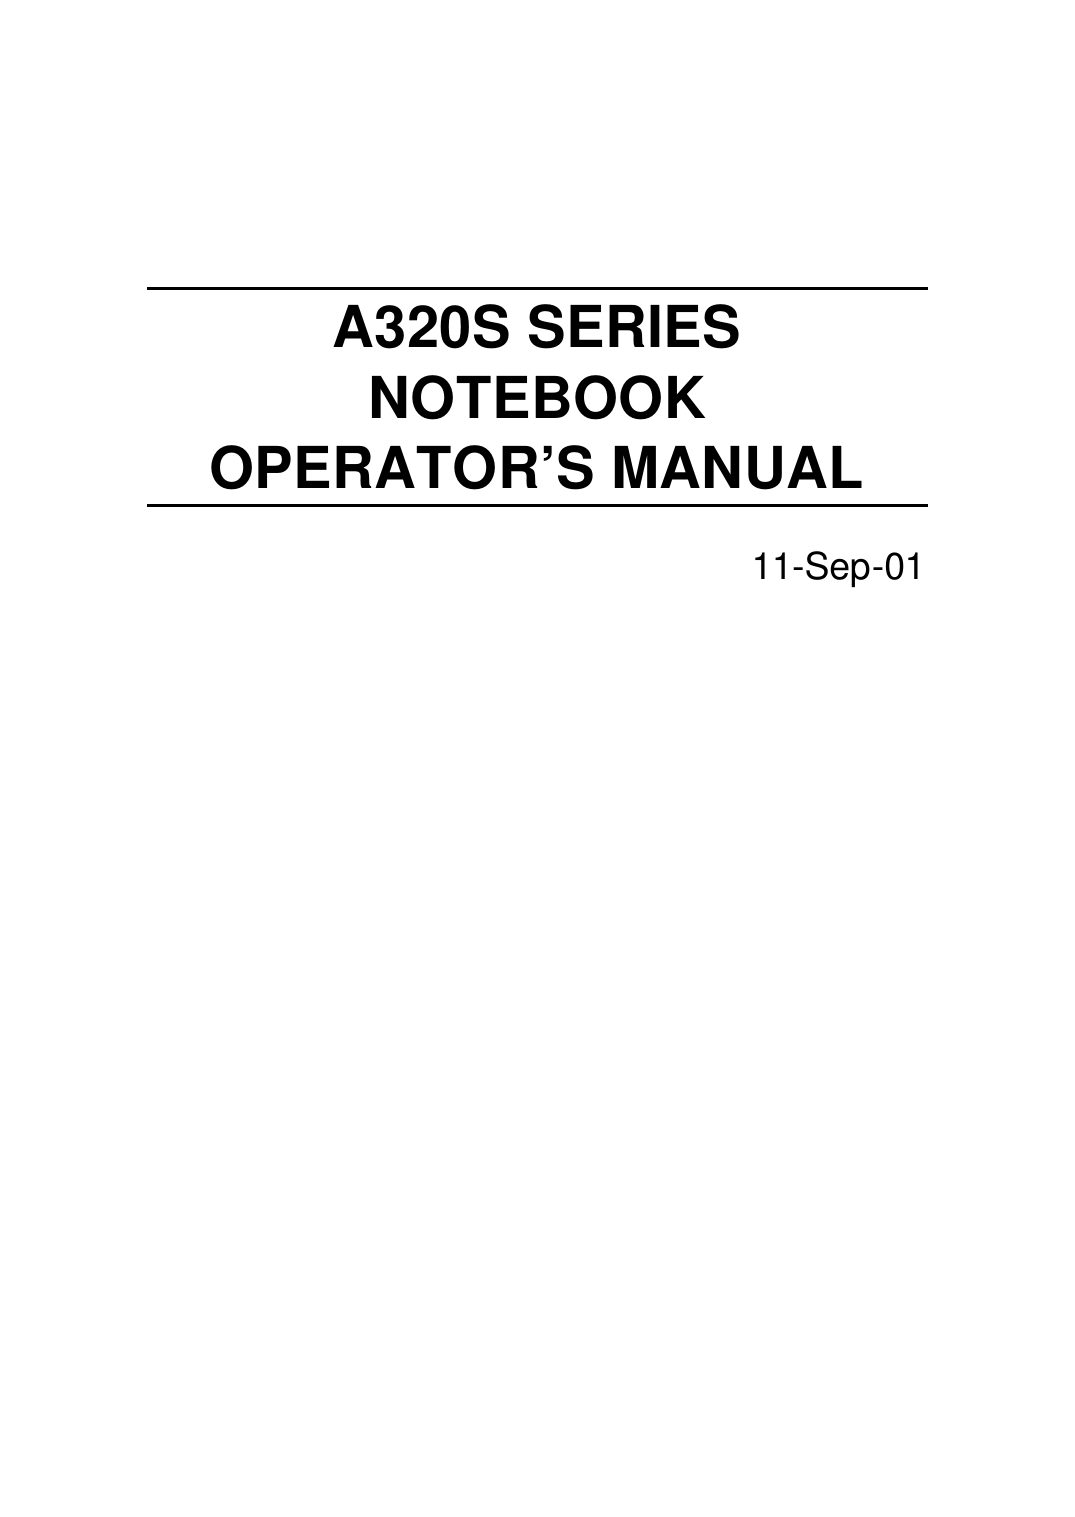         A320S SERIES  NOTEBOOK  OPERATOR’S MANUAL 11-Sep-01             